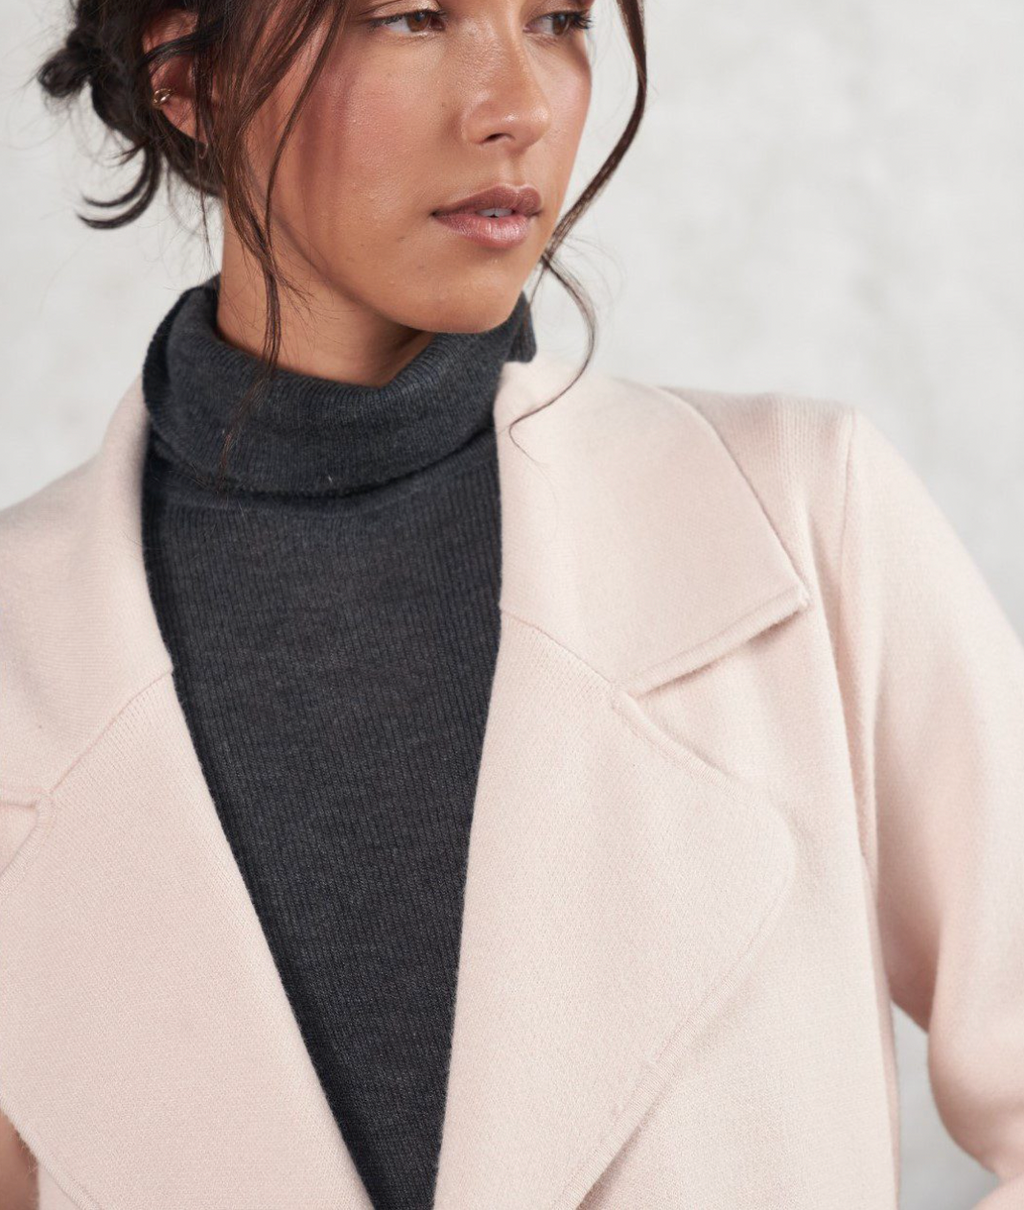  The mimi coatigan by little lies is a longline knitted coat in nude